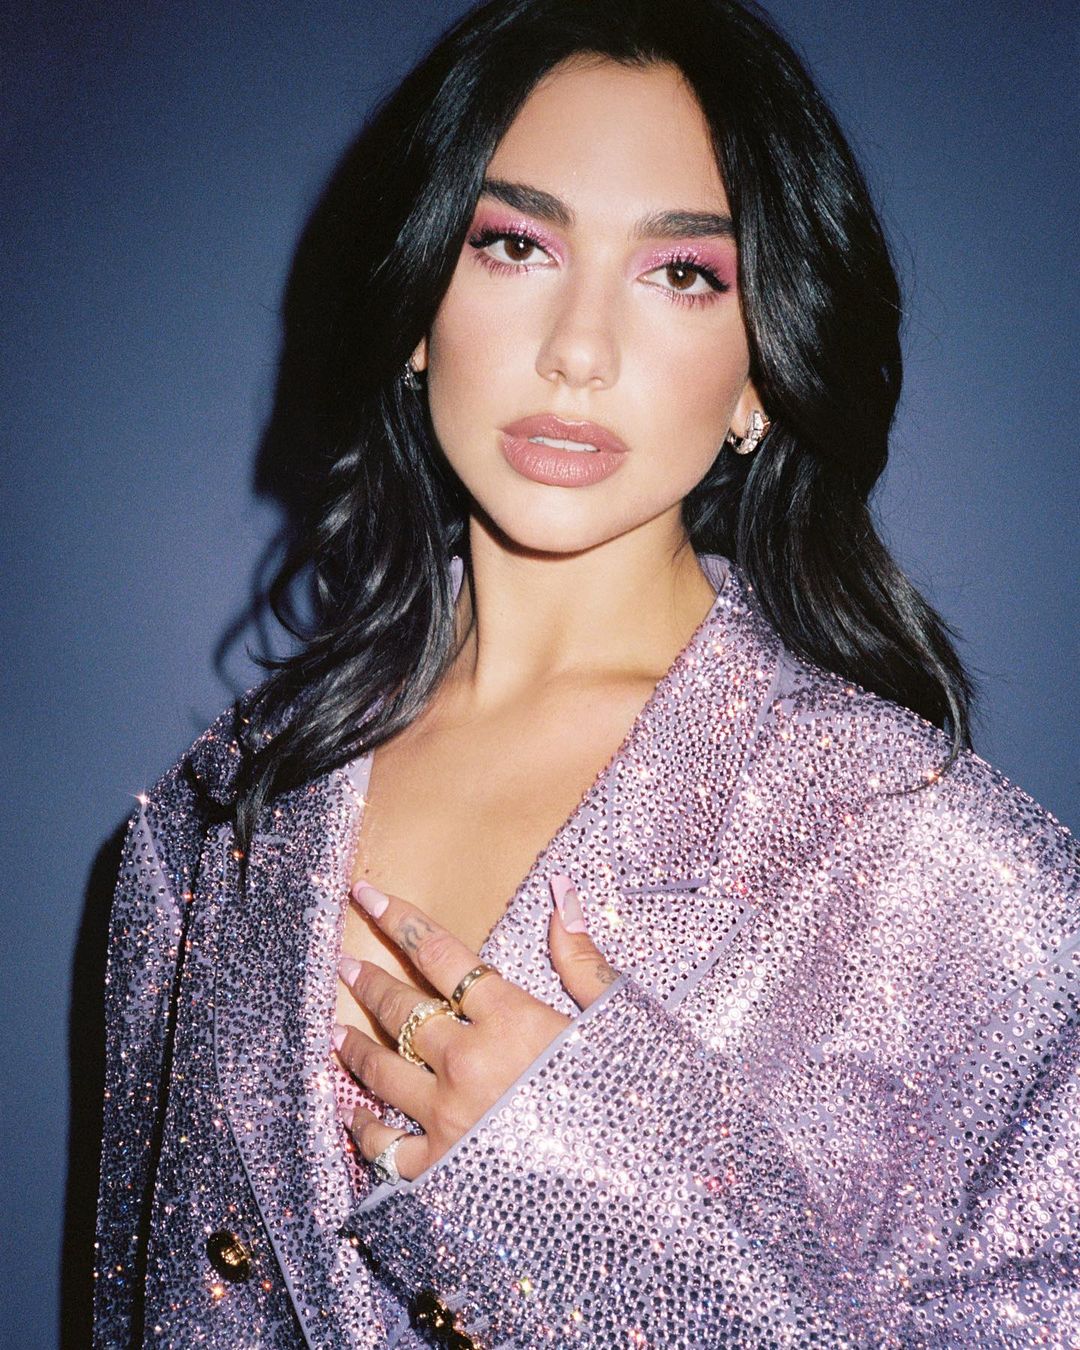 Dua Lip West Age, Height, Wife, Family – Biographyprofiles